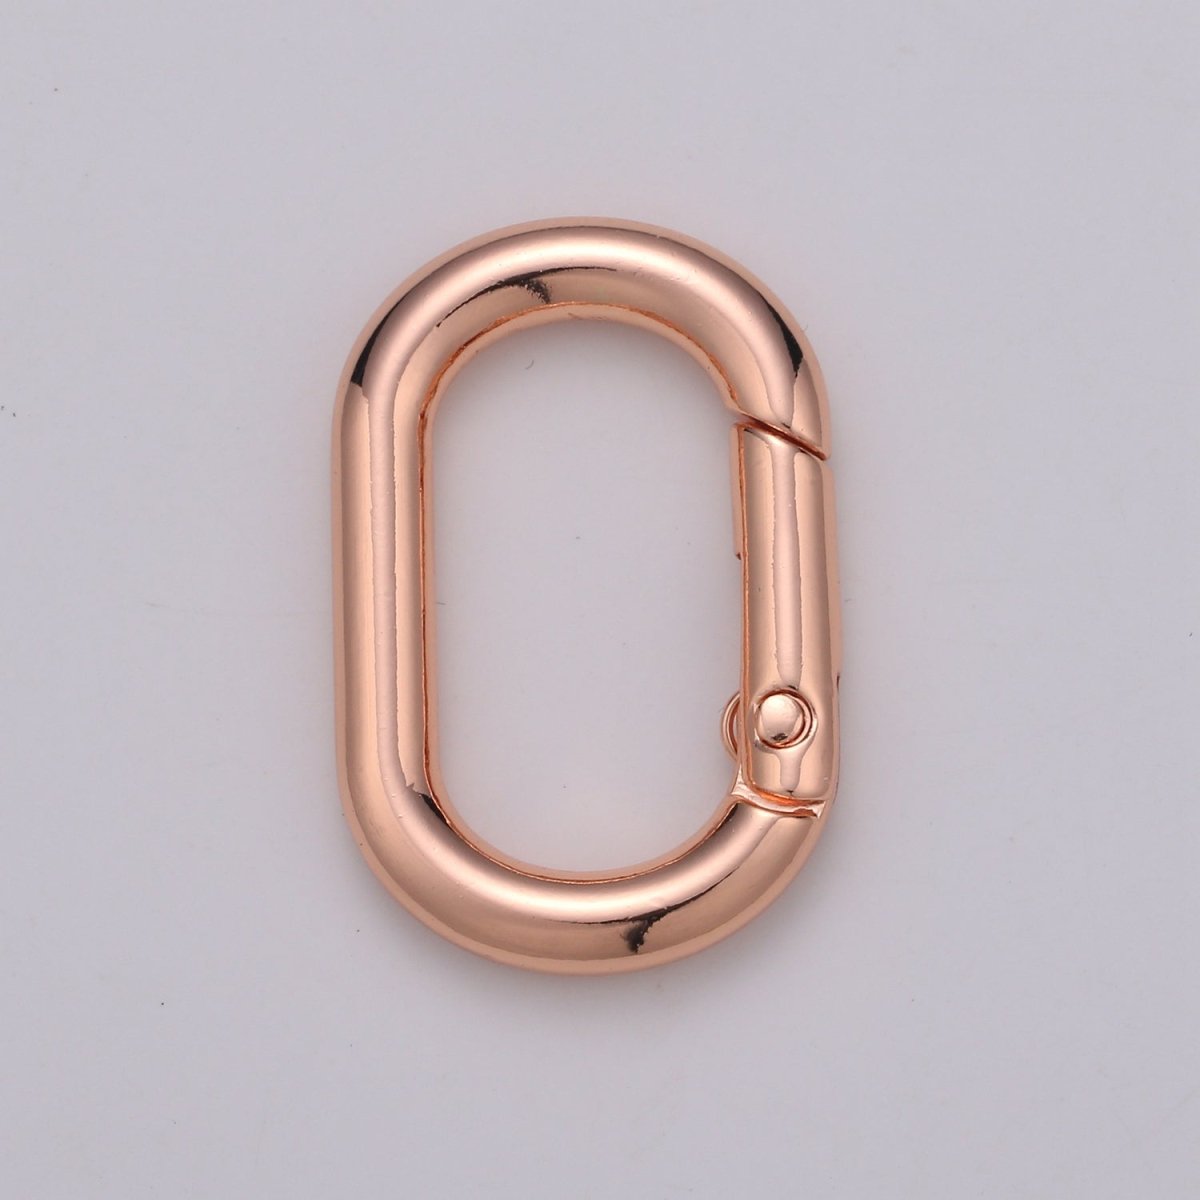 Gold, Silver, Rose Gold, Black Thick Push Gate Oval Clasp, Spring gate Clasp, 20x31mm Chunky Clasp for Statement Necklace L-028~L-031 - DLUXCA